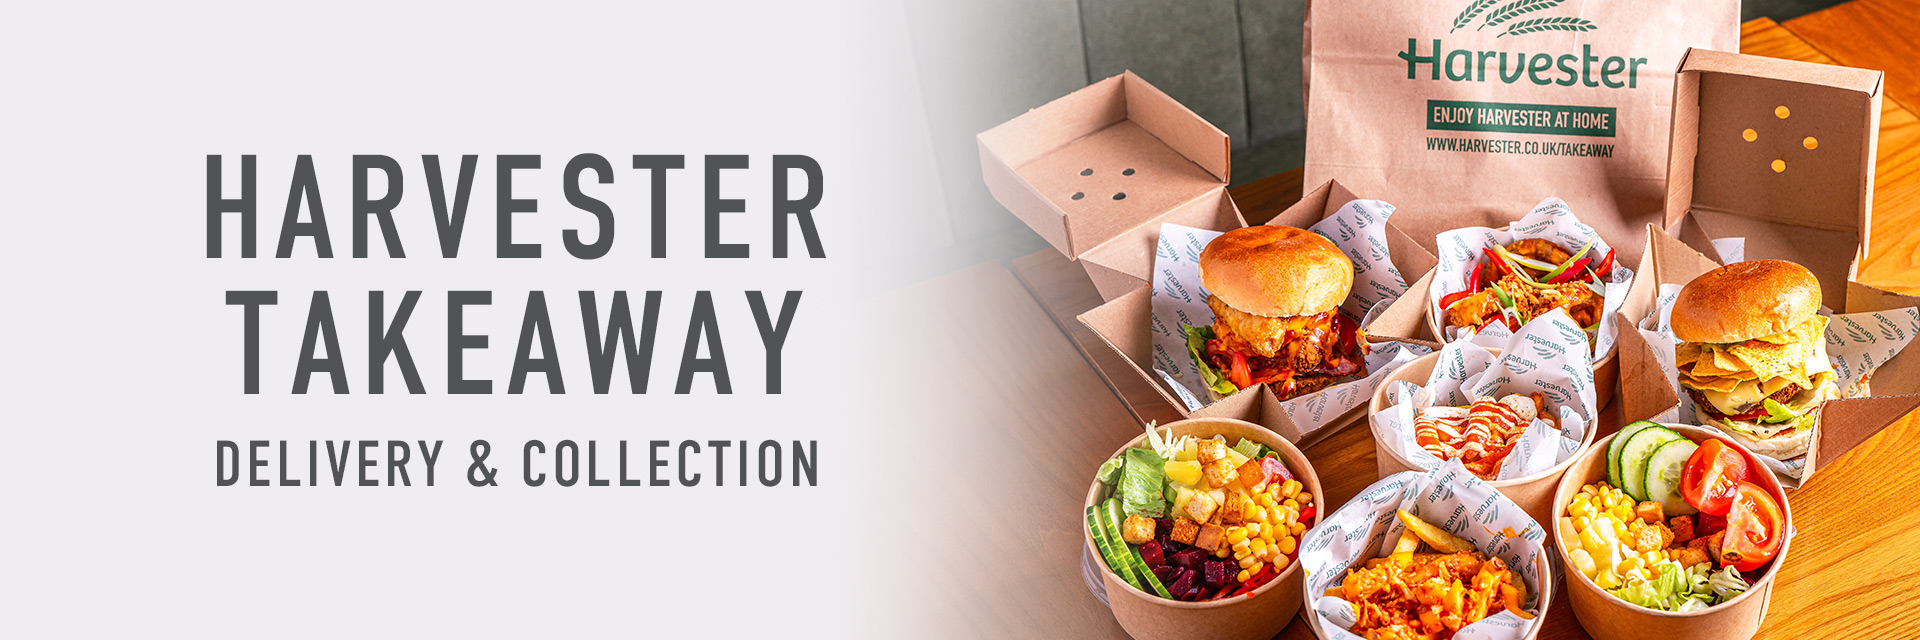 Harvester Croxley Green takeaway, delivery, collection